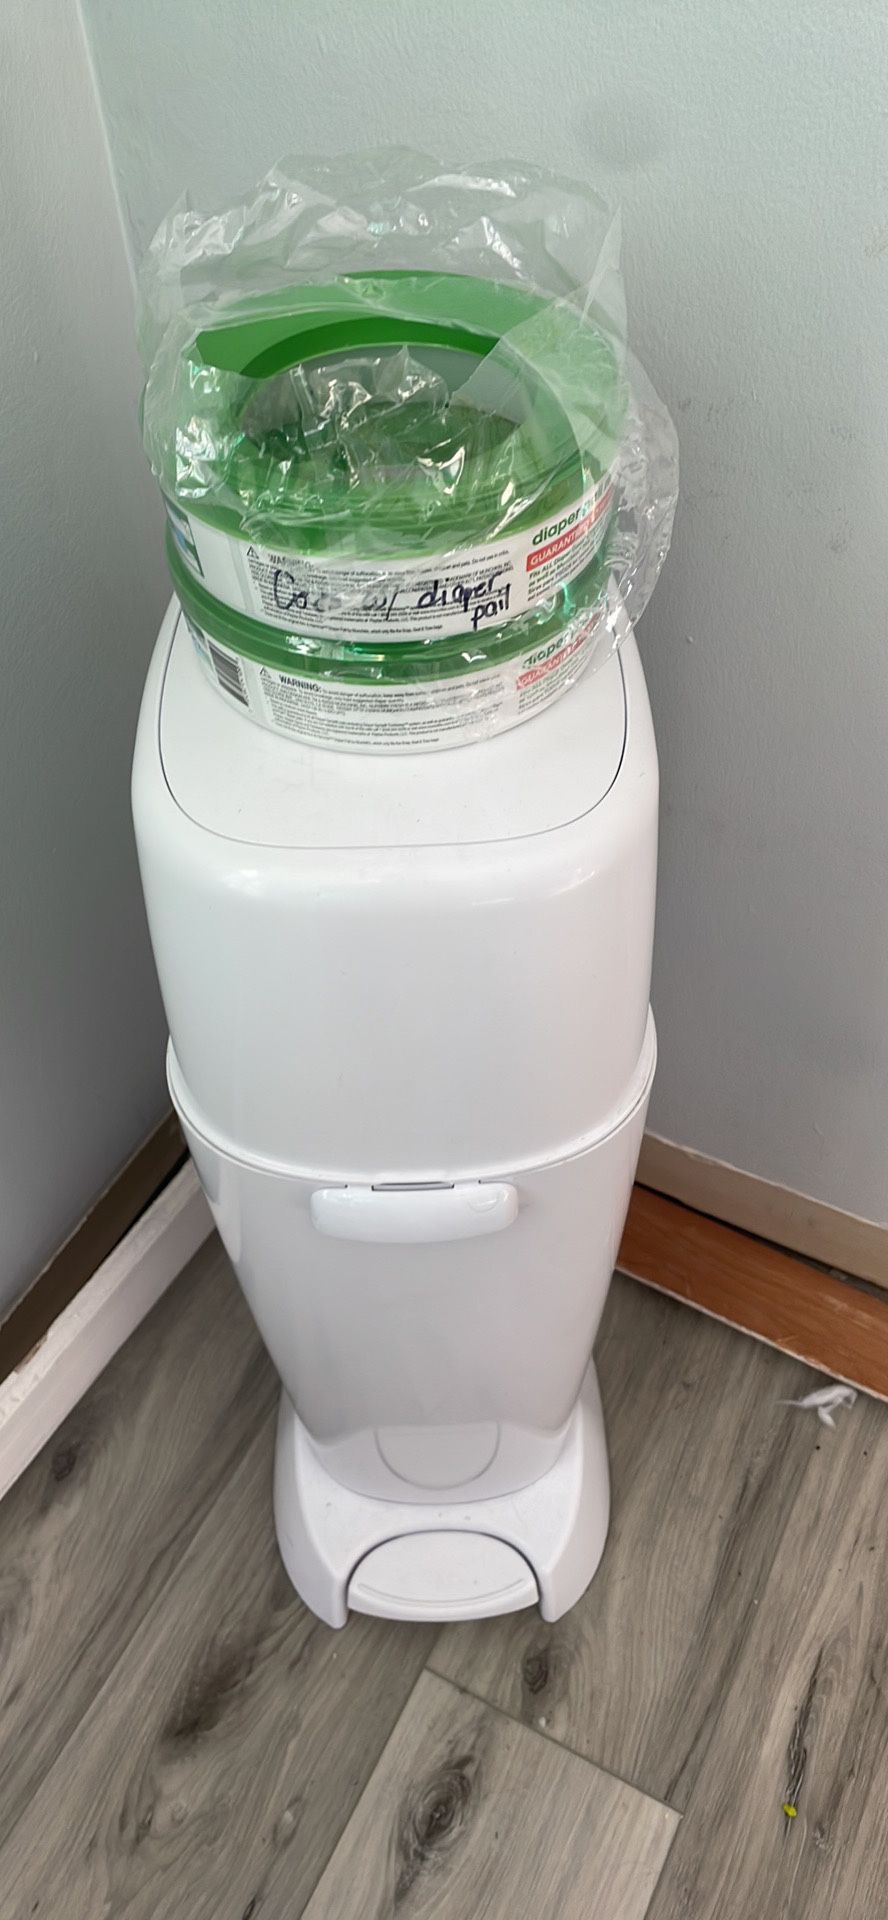 Diaper Pail And refills 